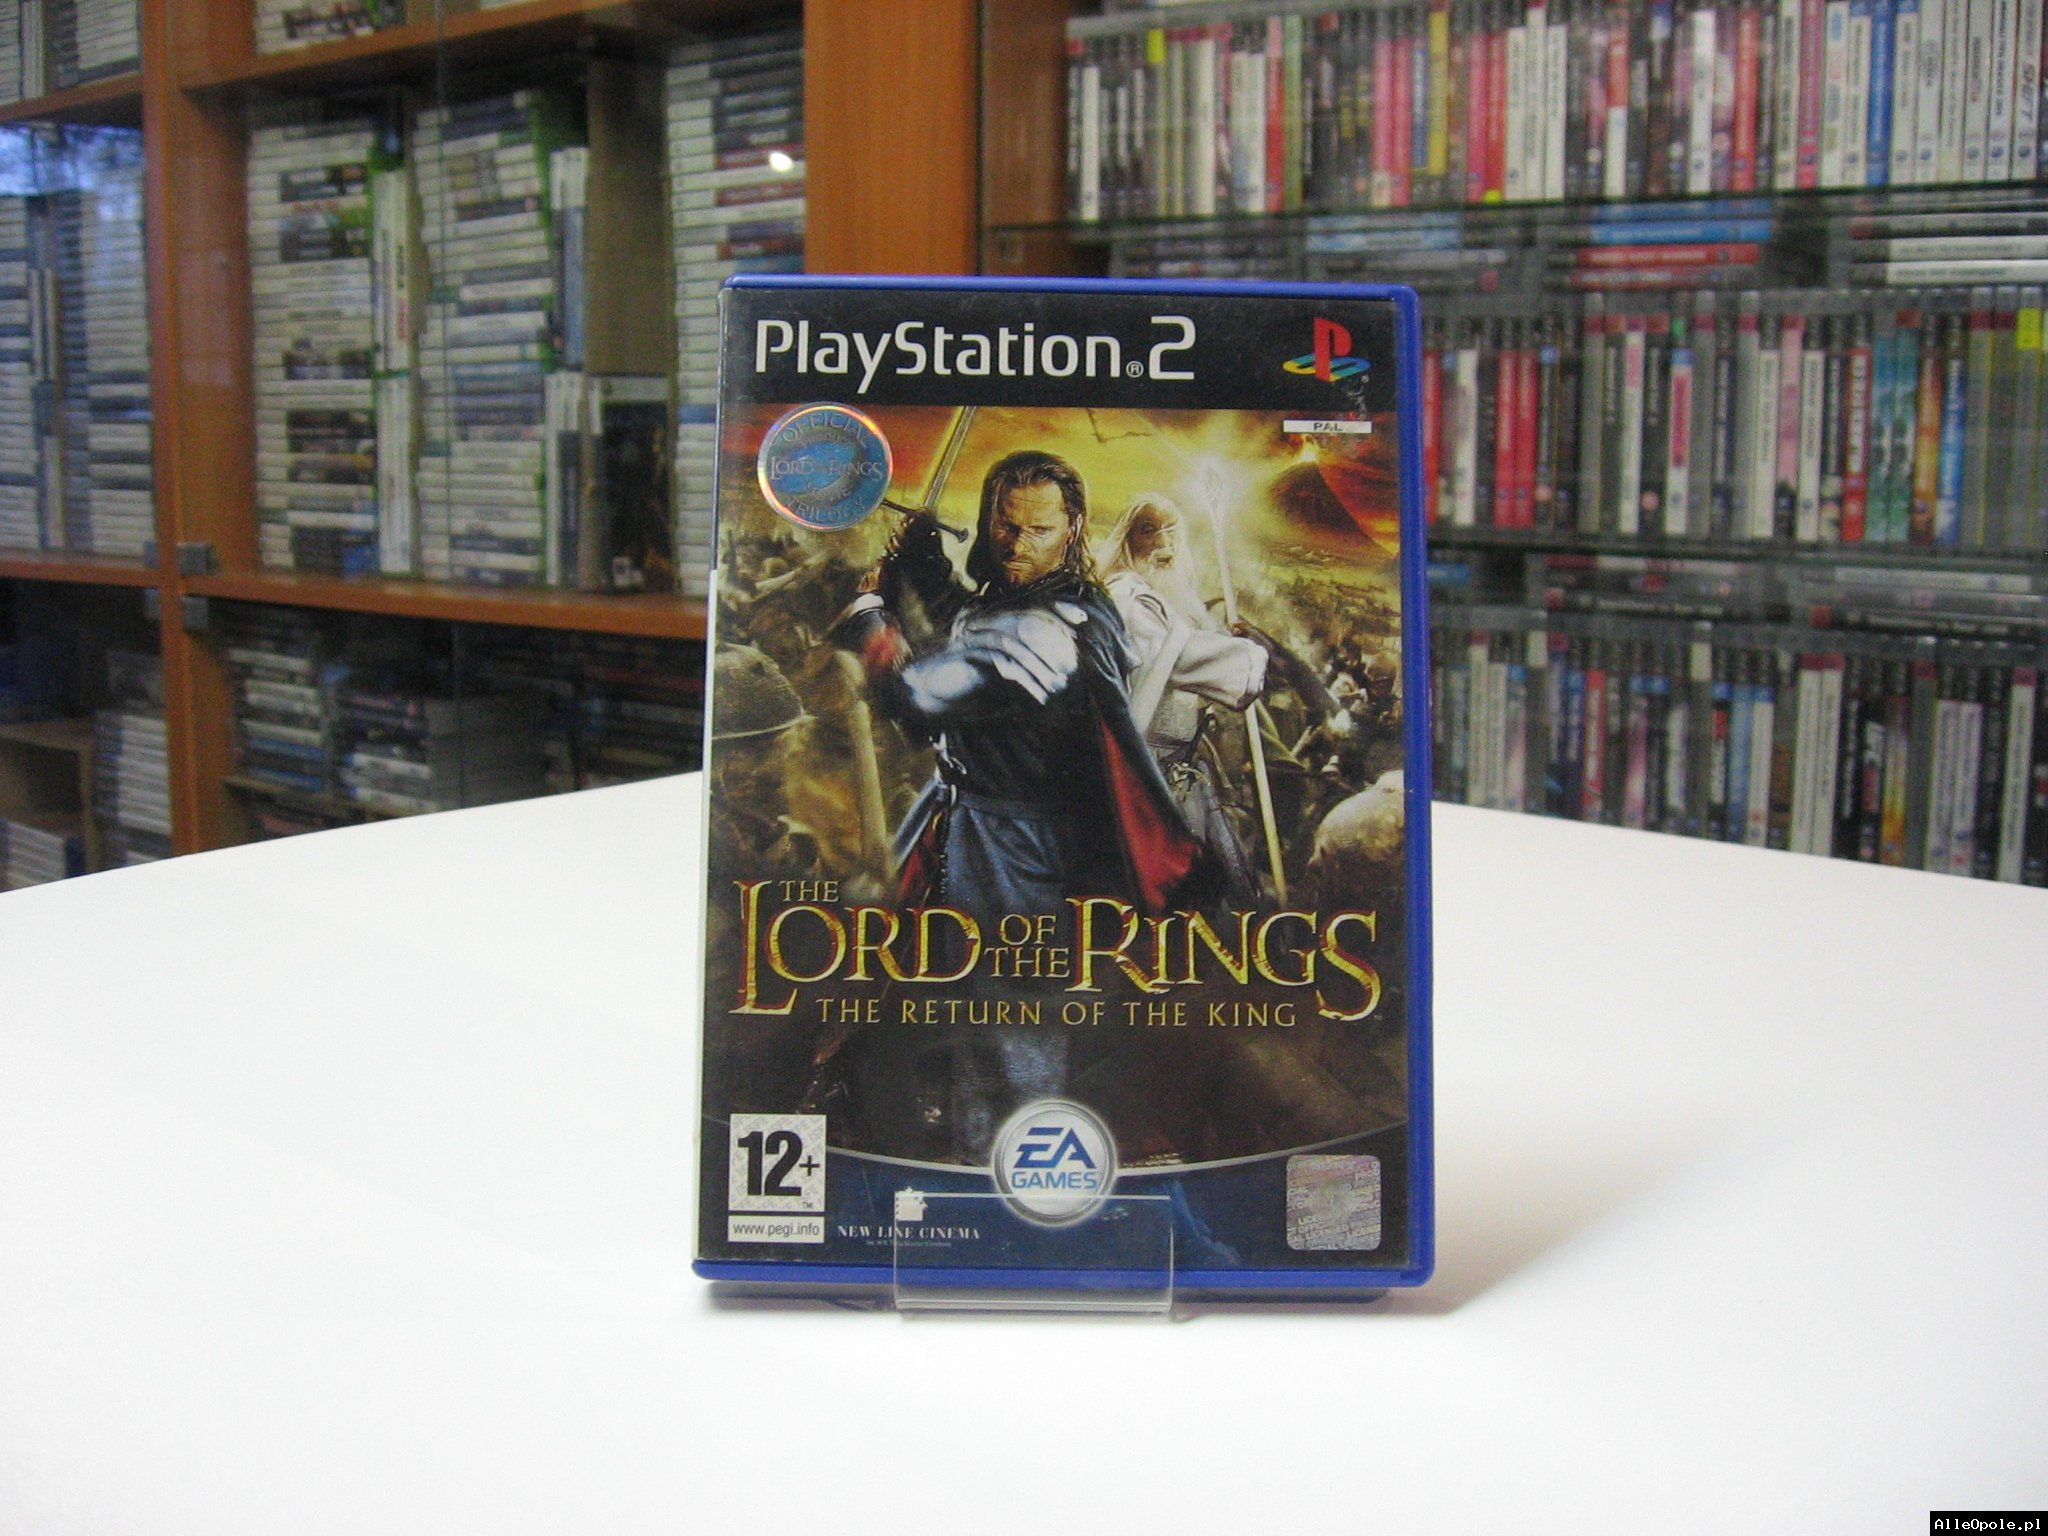 The Lord of the Rings: The Return of the King - GRA Ps2 - Opole 0596